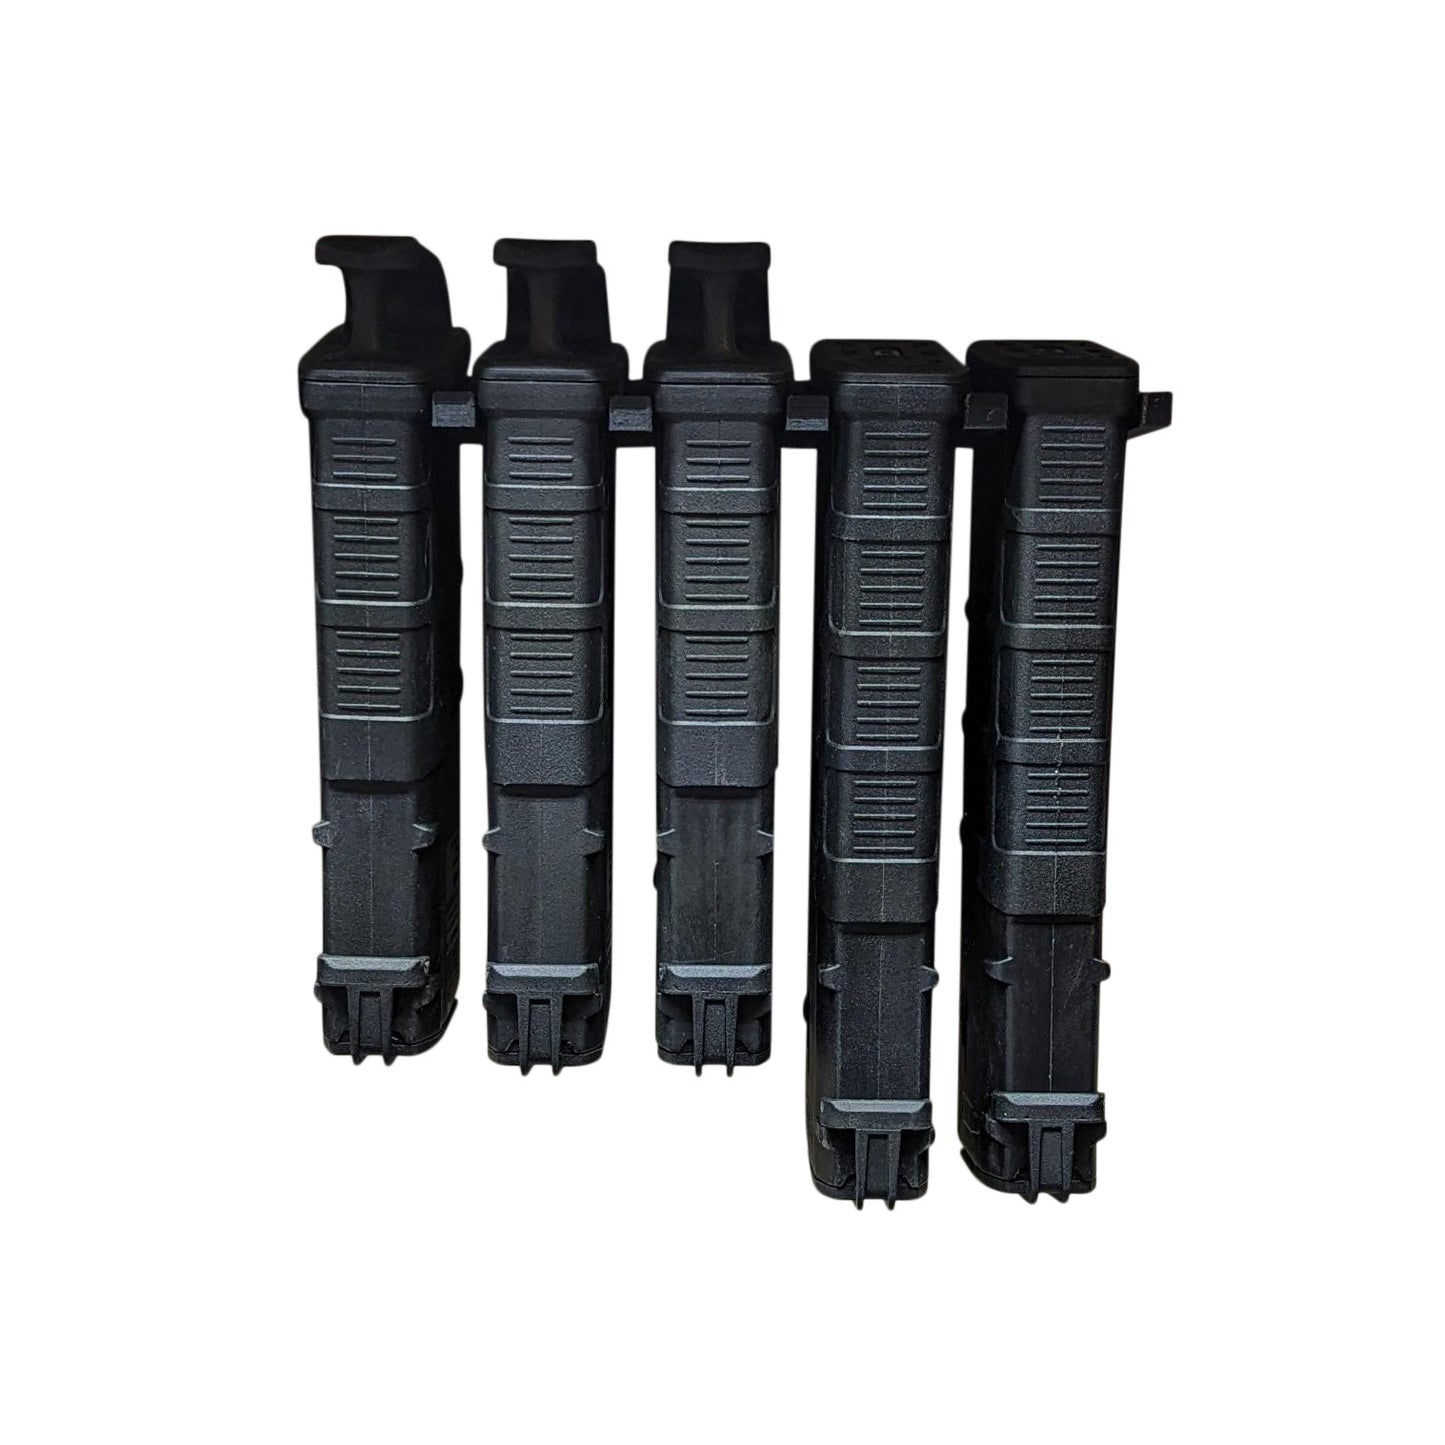 Mount for AR 10 308/762 Pmag Mags - Wall | Magazine Holder Storage Rack